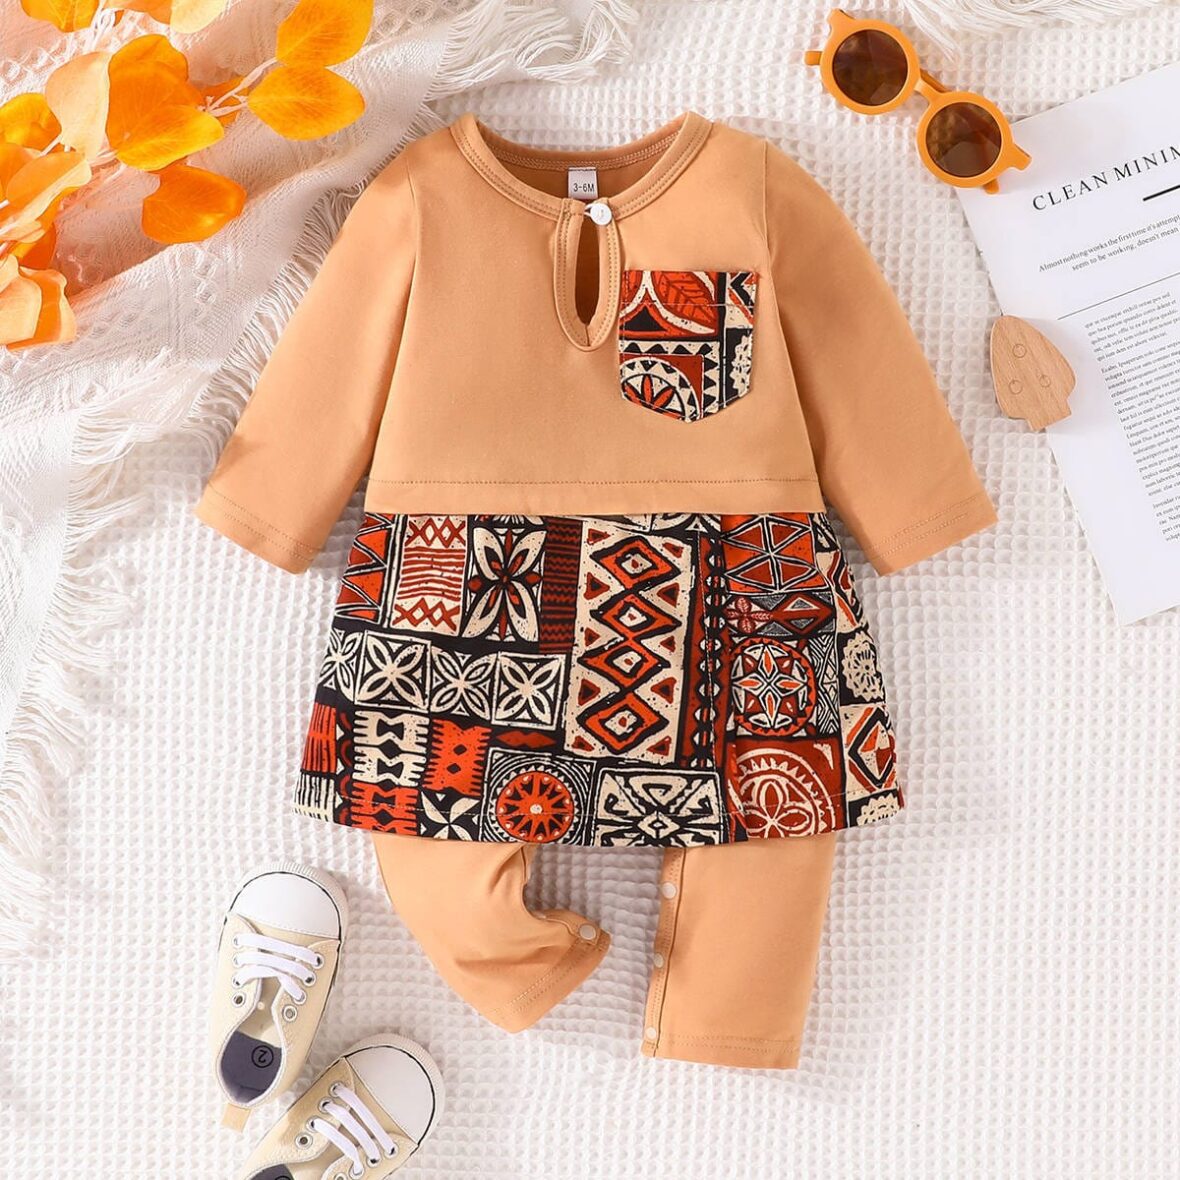 Baby Girl Romper Dress Available On Mid-Year Clearance Sales